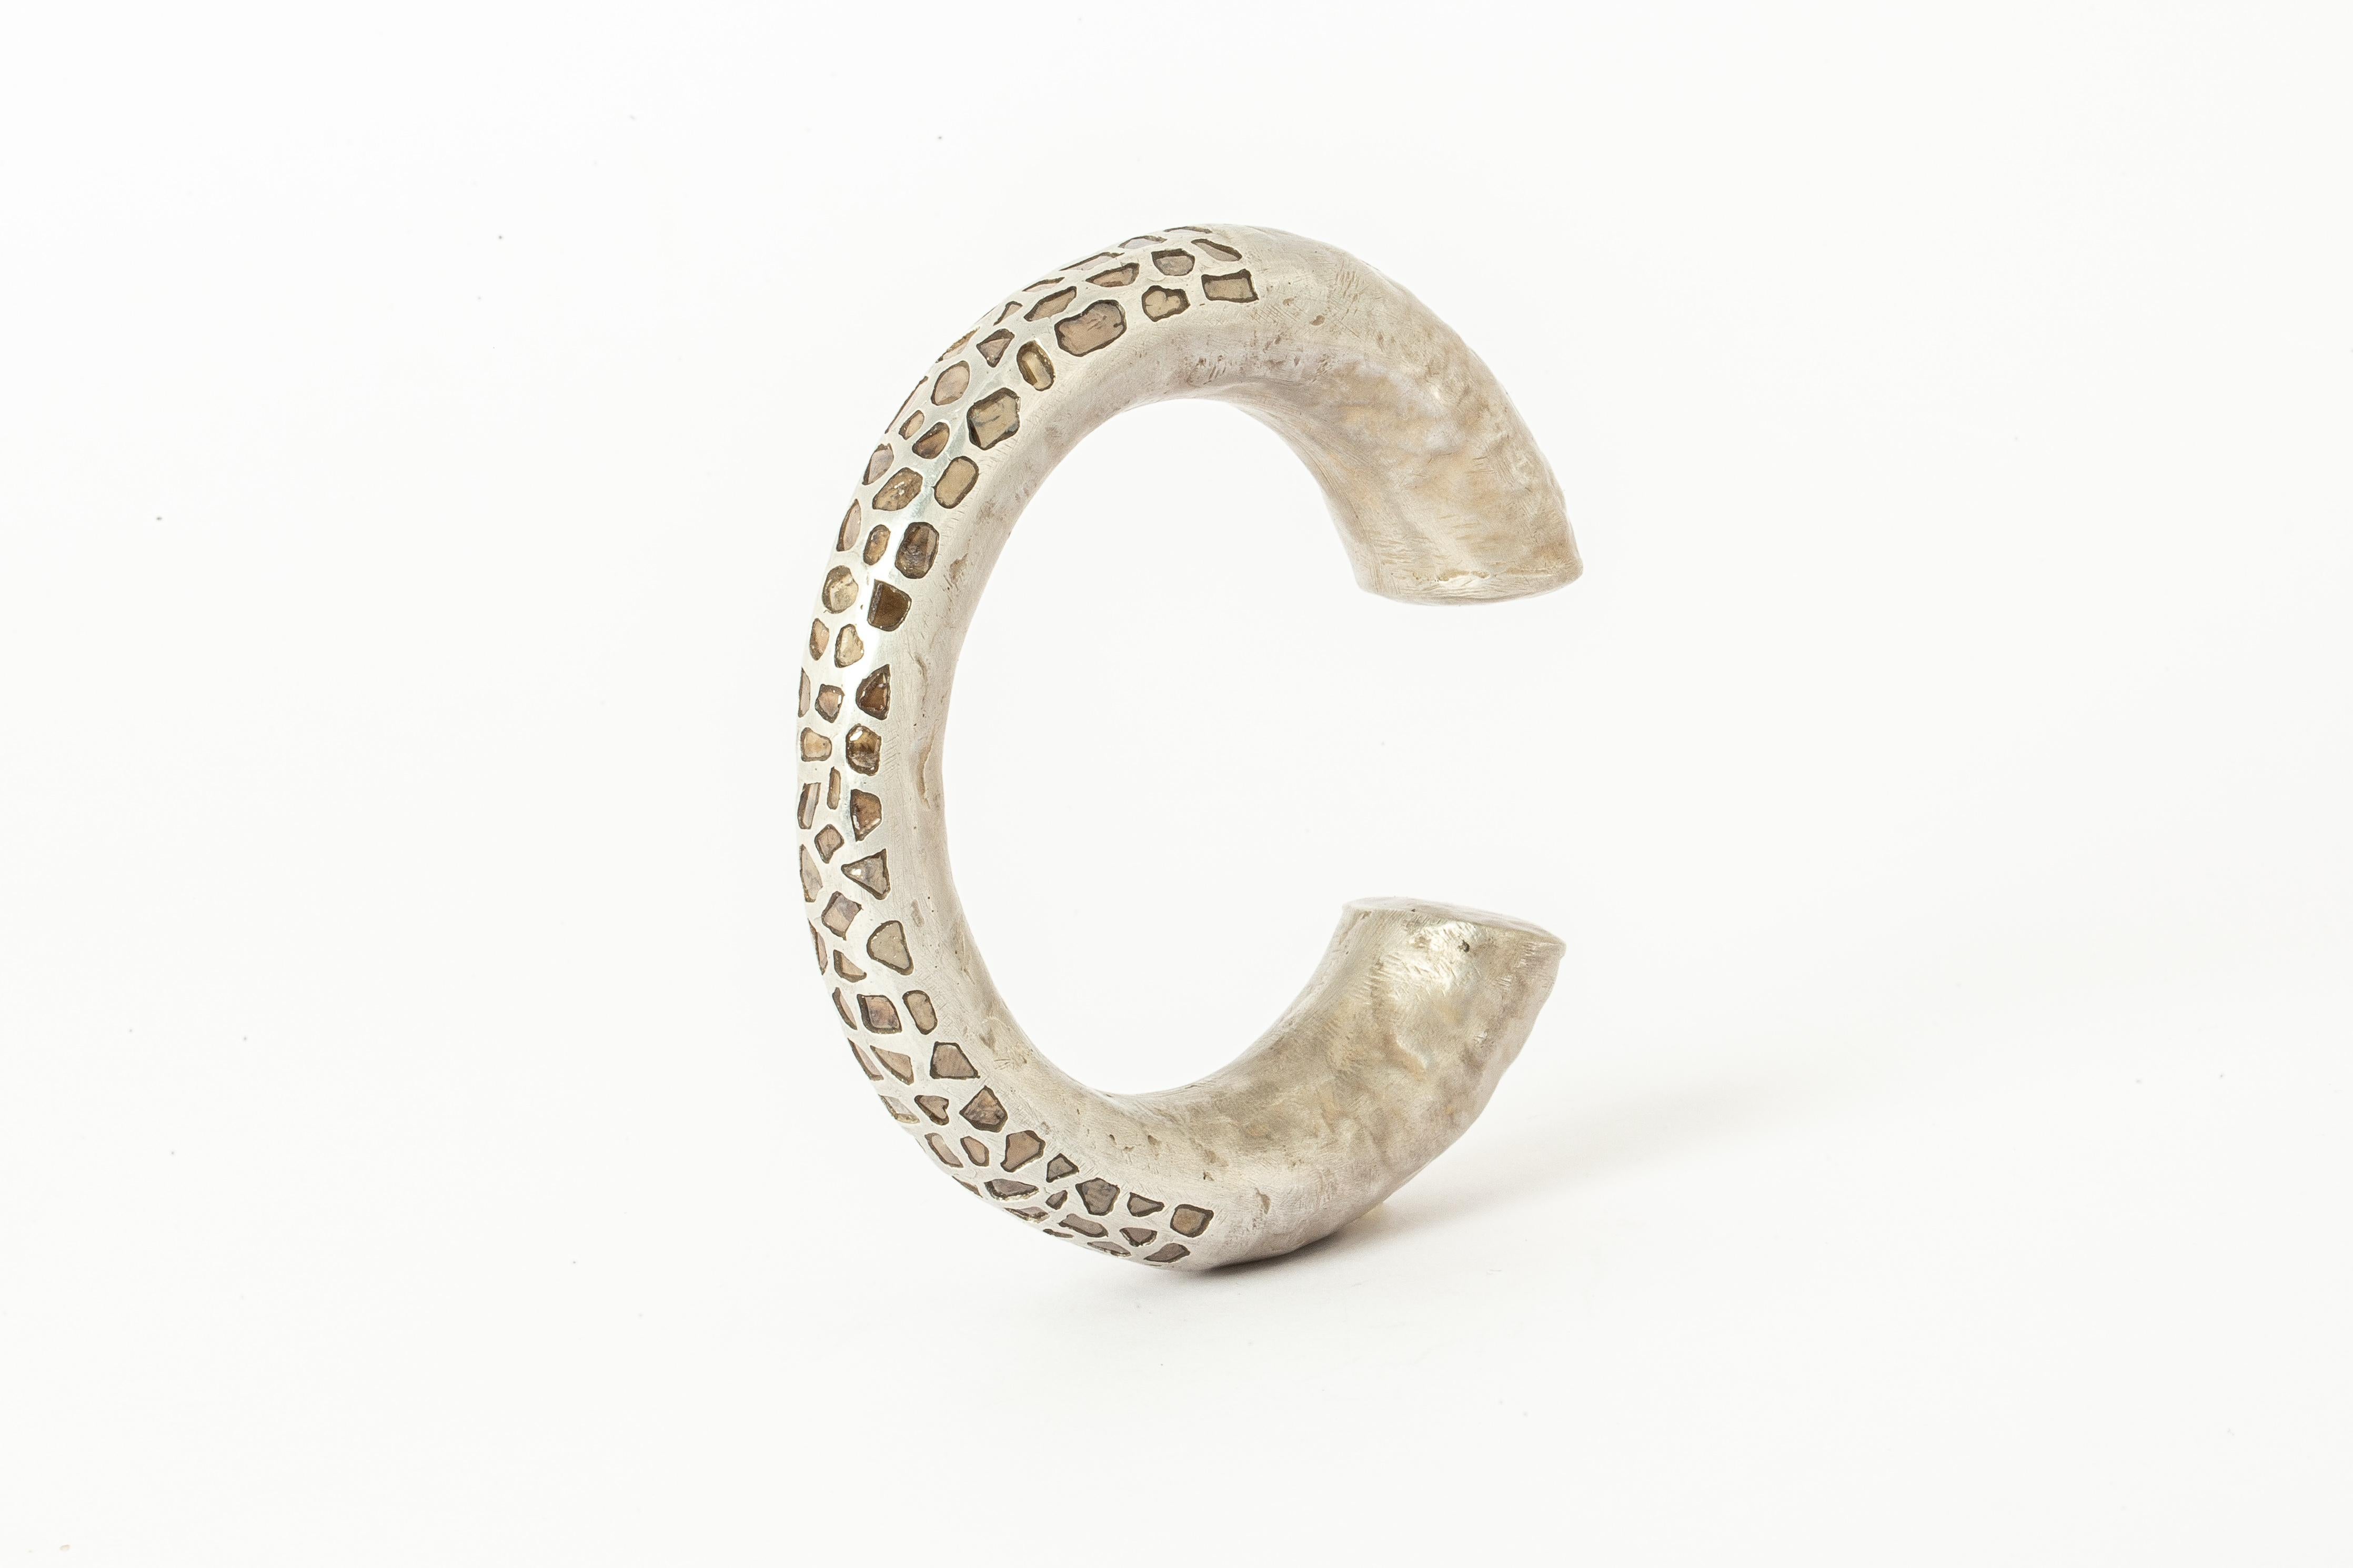 Bracelet in acid treated sterling silver and slabs of rough diamond set in mega pave setting. These slabs are removed from a larger chunk of diamond. This item is made with a naturally occurring element and will vary from the photograph you see.